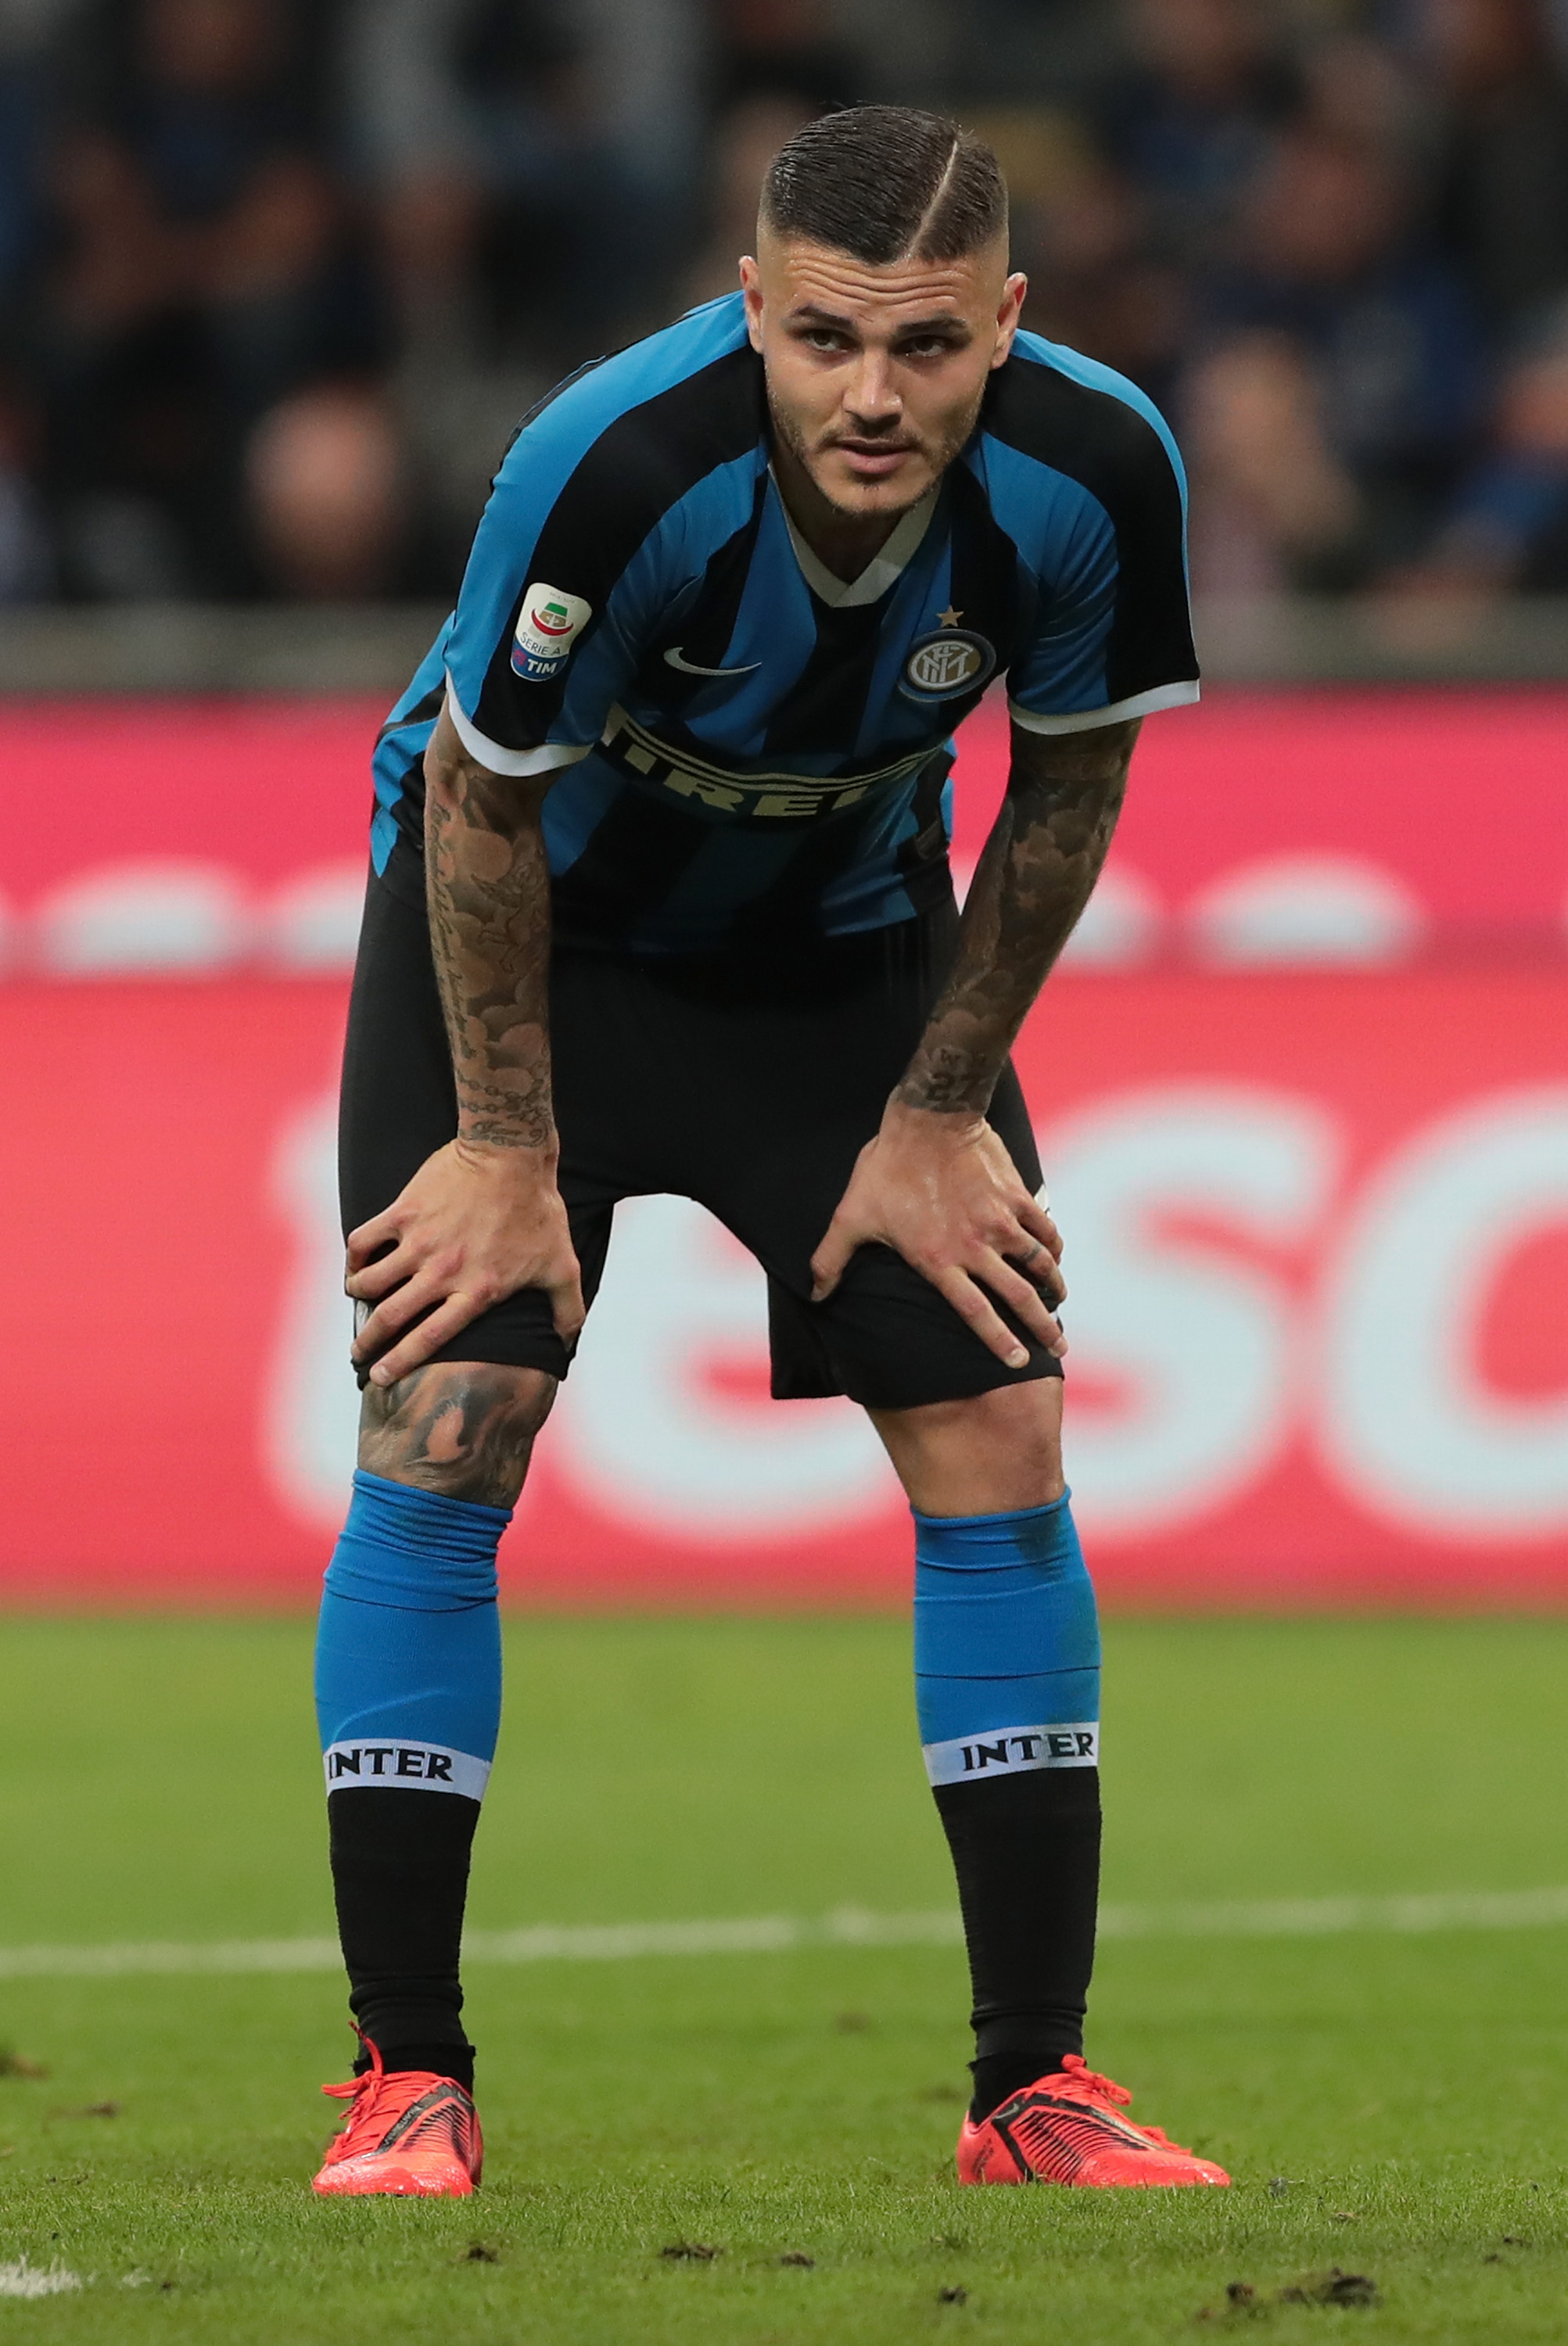 Inter Milan send Icardi to PSG on loan, with option to buy - NBC Sports